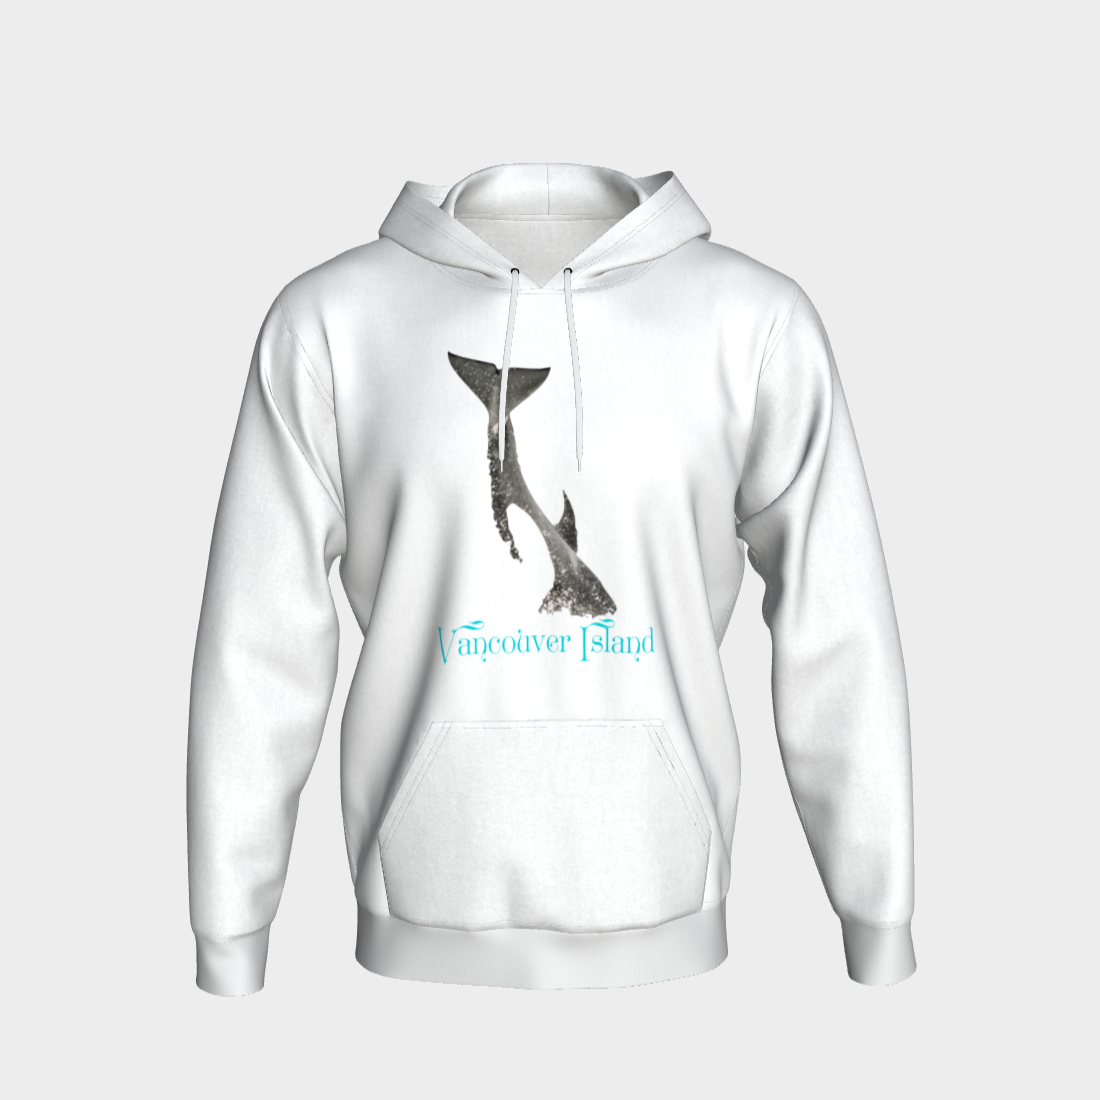 Orca Breach Vancouver Island Unisex Pullover Hoodie Your Van Isle Goddess unisex pullover hoodie is a great classic hoodie!  Created with state of the art tri-tex material which is a non-shrink poly middle encased in two layers of ultra soft cotton face and lining.